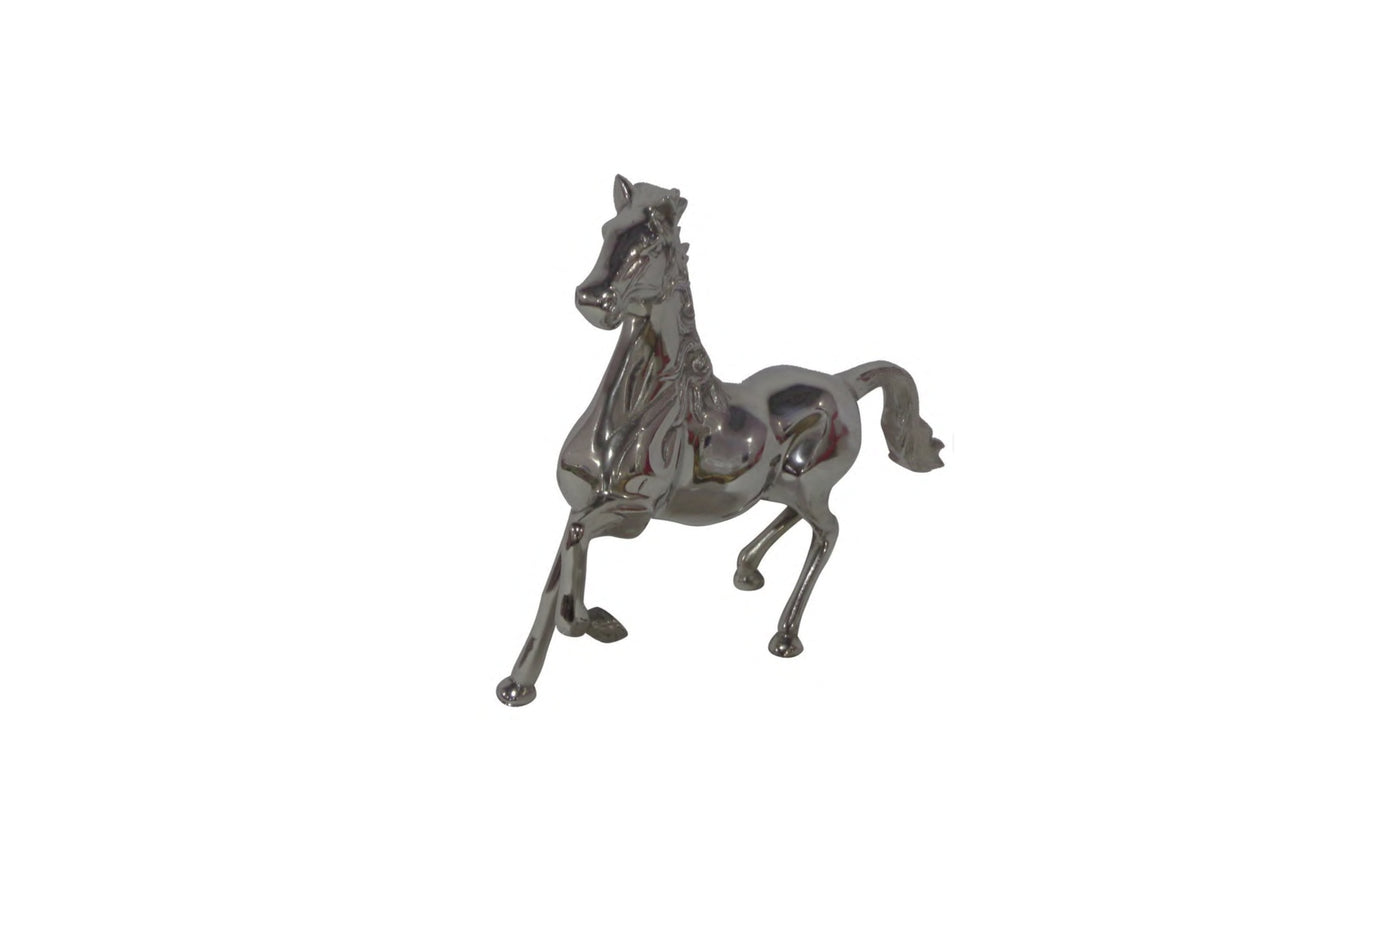 Aluminium Horse object Hoya Casa Hoyacasa.ca couch sofa bed 4 seater sectional table kitchen table love seat sofa bed matress Toronto Canada manufactures home decoration frames indoor Ottoman